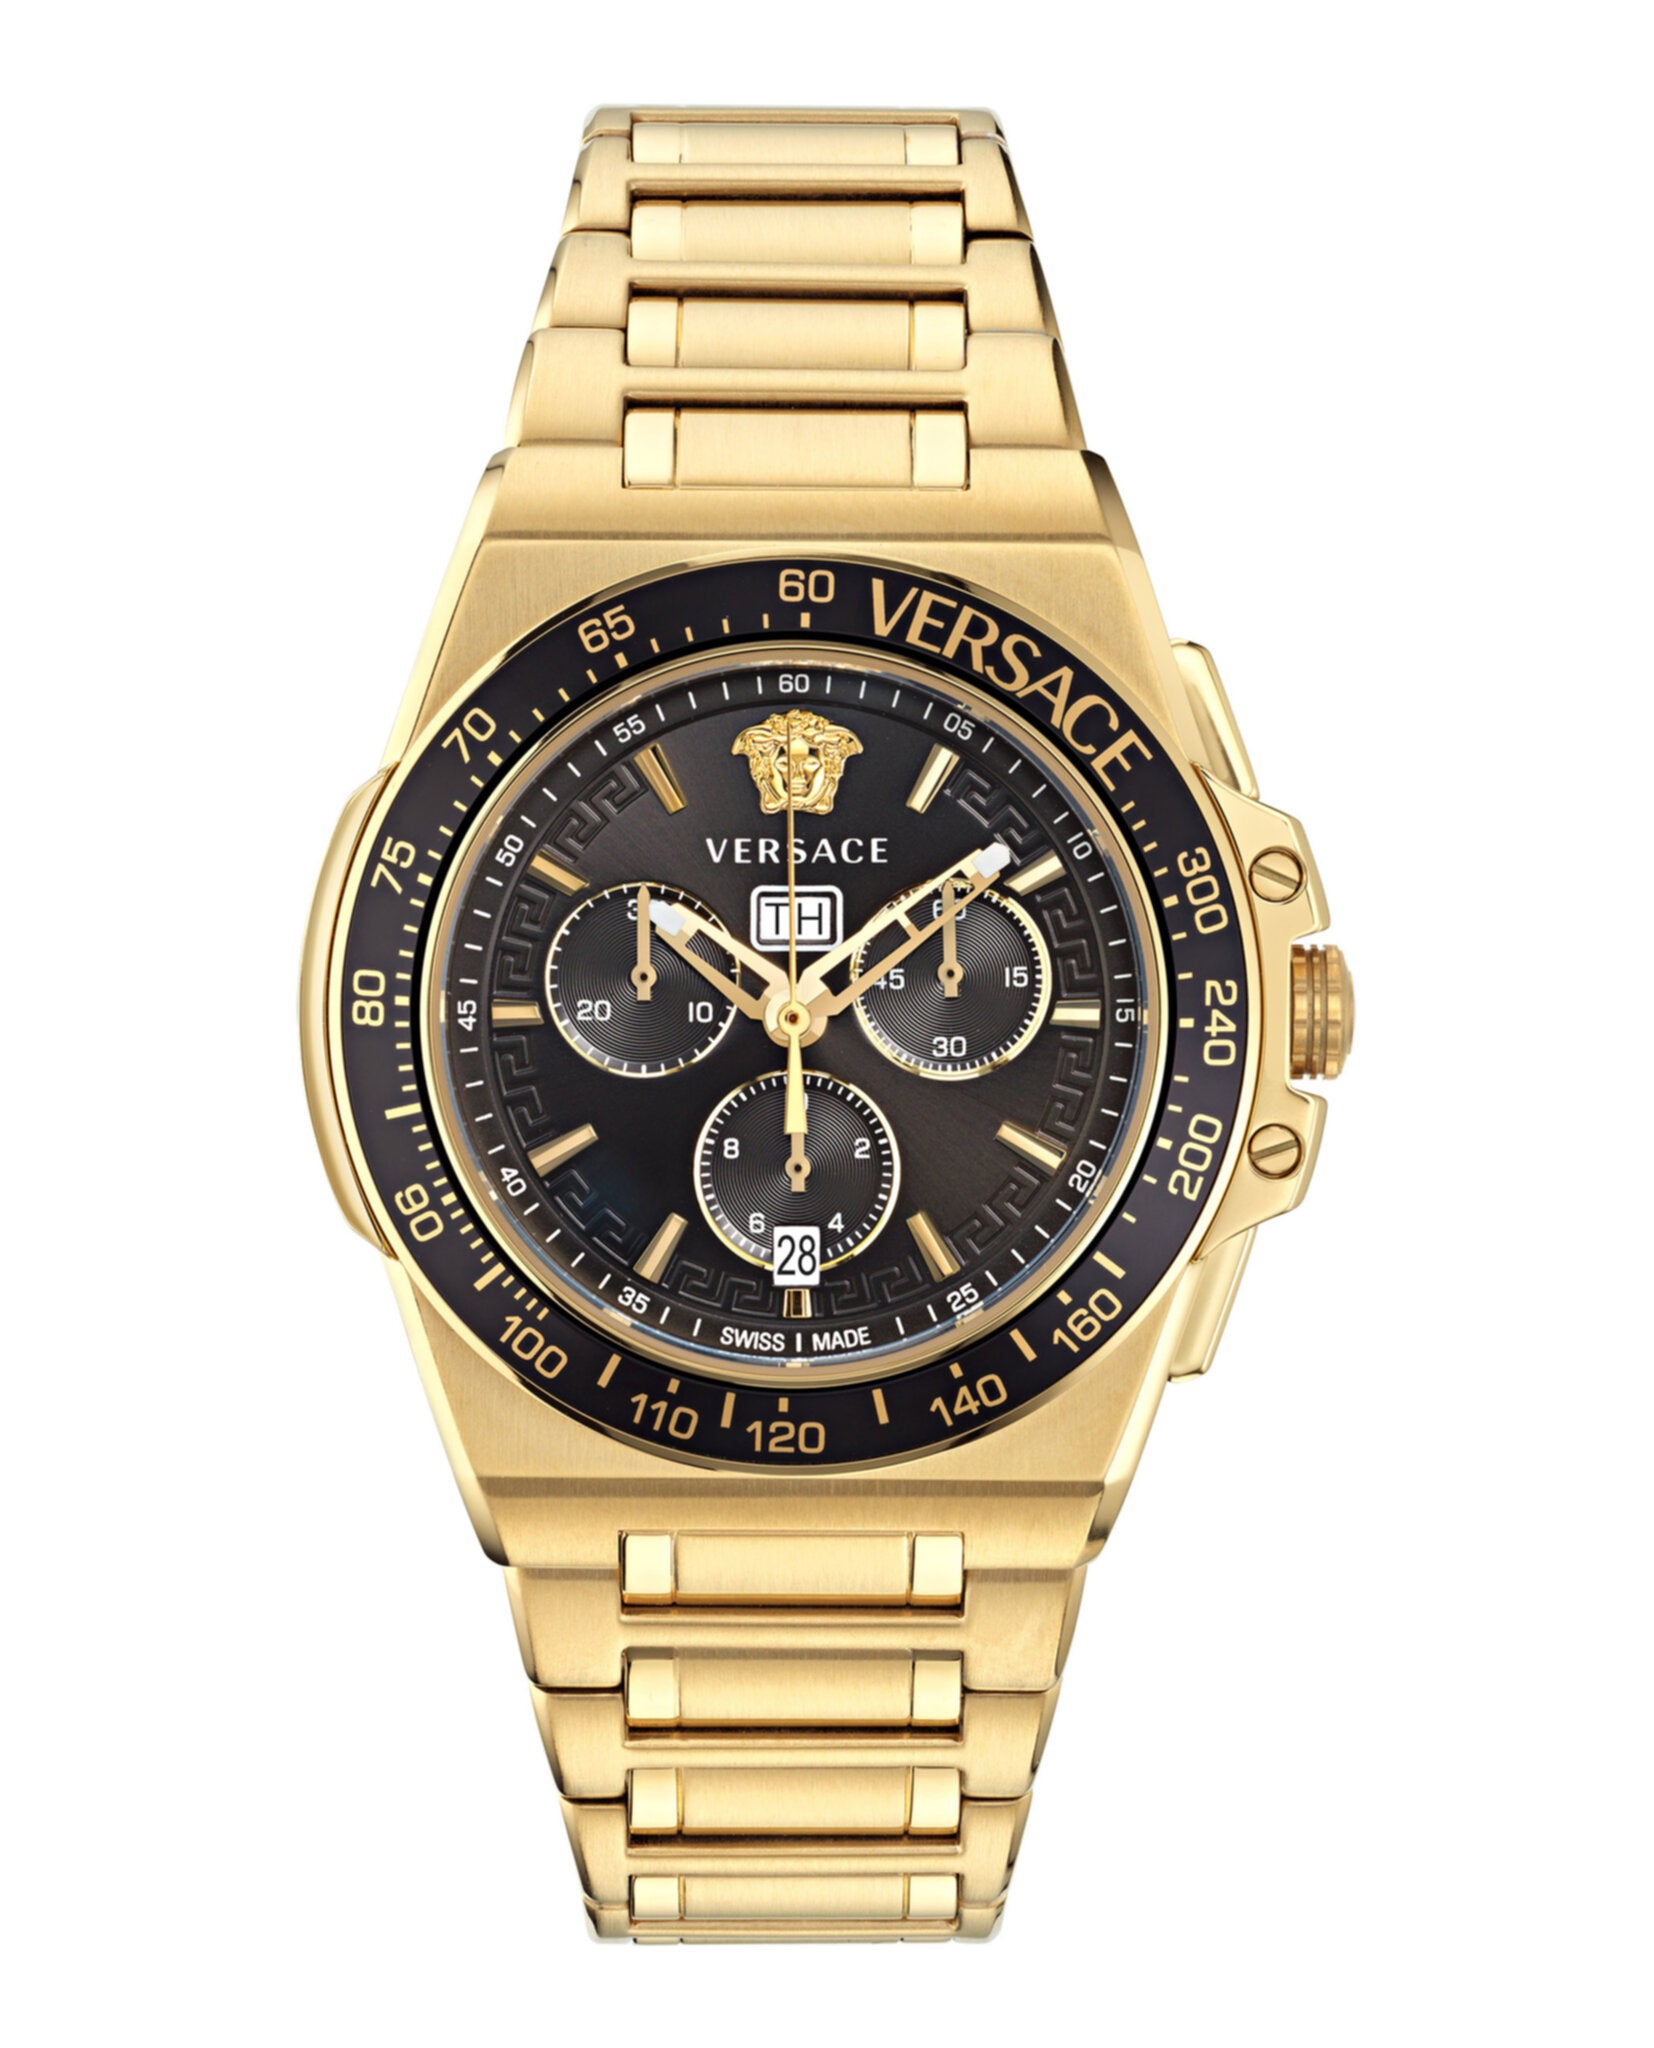 MadaLuxe Extreme Versace Watches – Chrono Time | Madaluxe Mens Time Greca